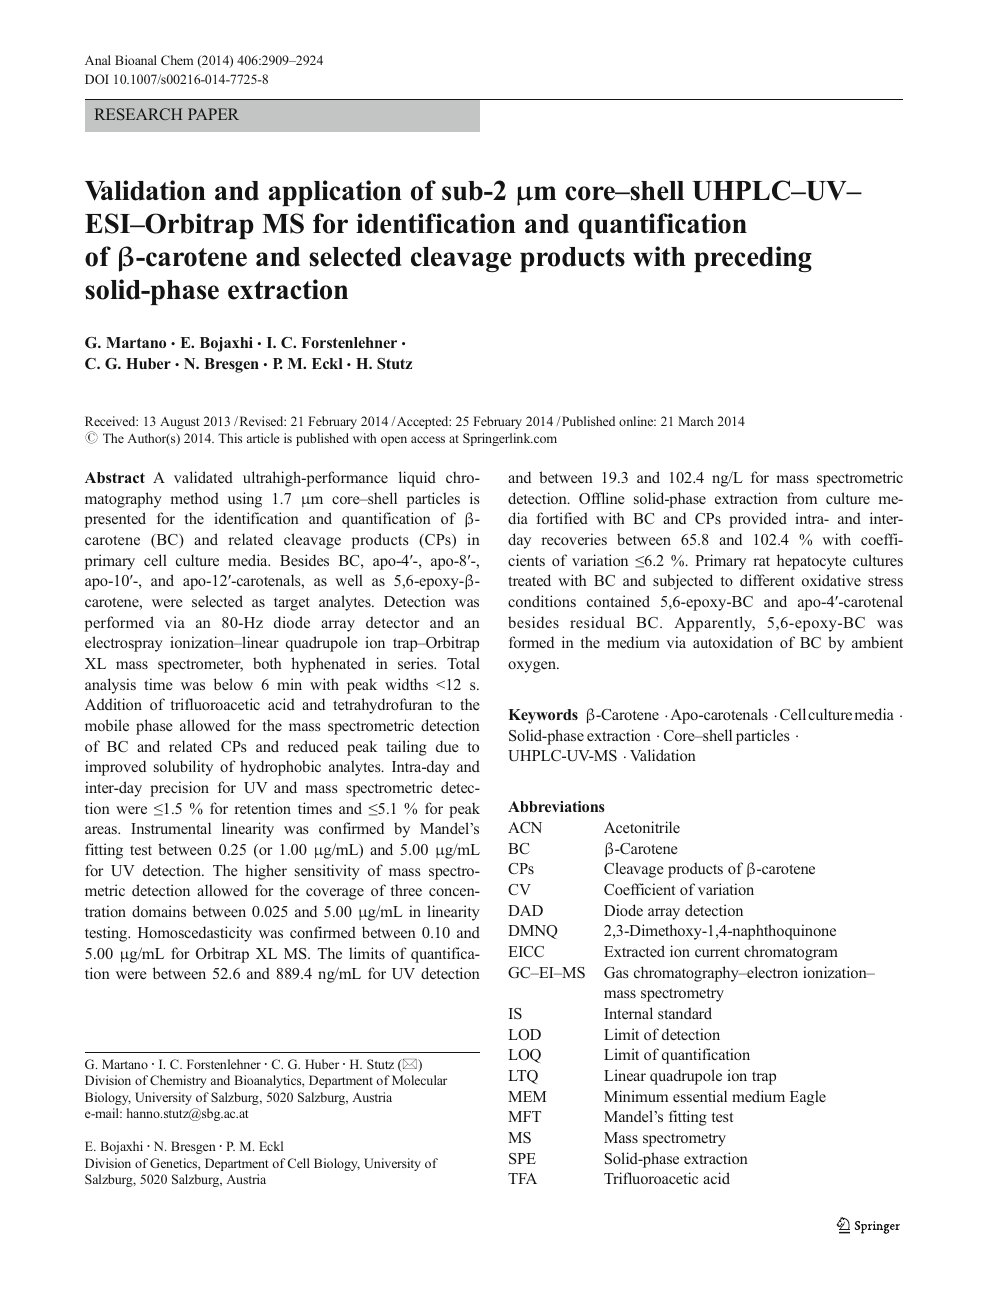 Validation And Application Of Sub 2 Mm Core Shell Uhplc Uv Esi Orbitrap Ms For Identification And Quantification Of B Carotene And Selected Cleavage Products With Preceding Solid Phase Extraction Topic Of Research Paper In Chemical Sciences Download